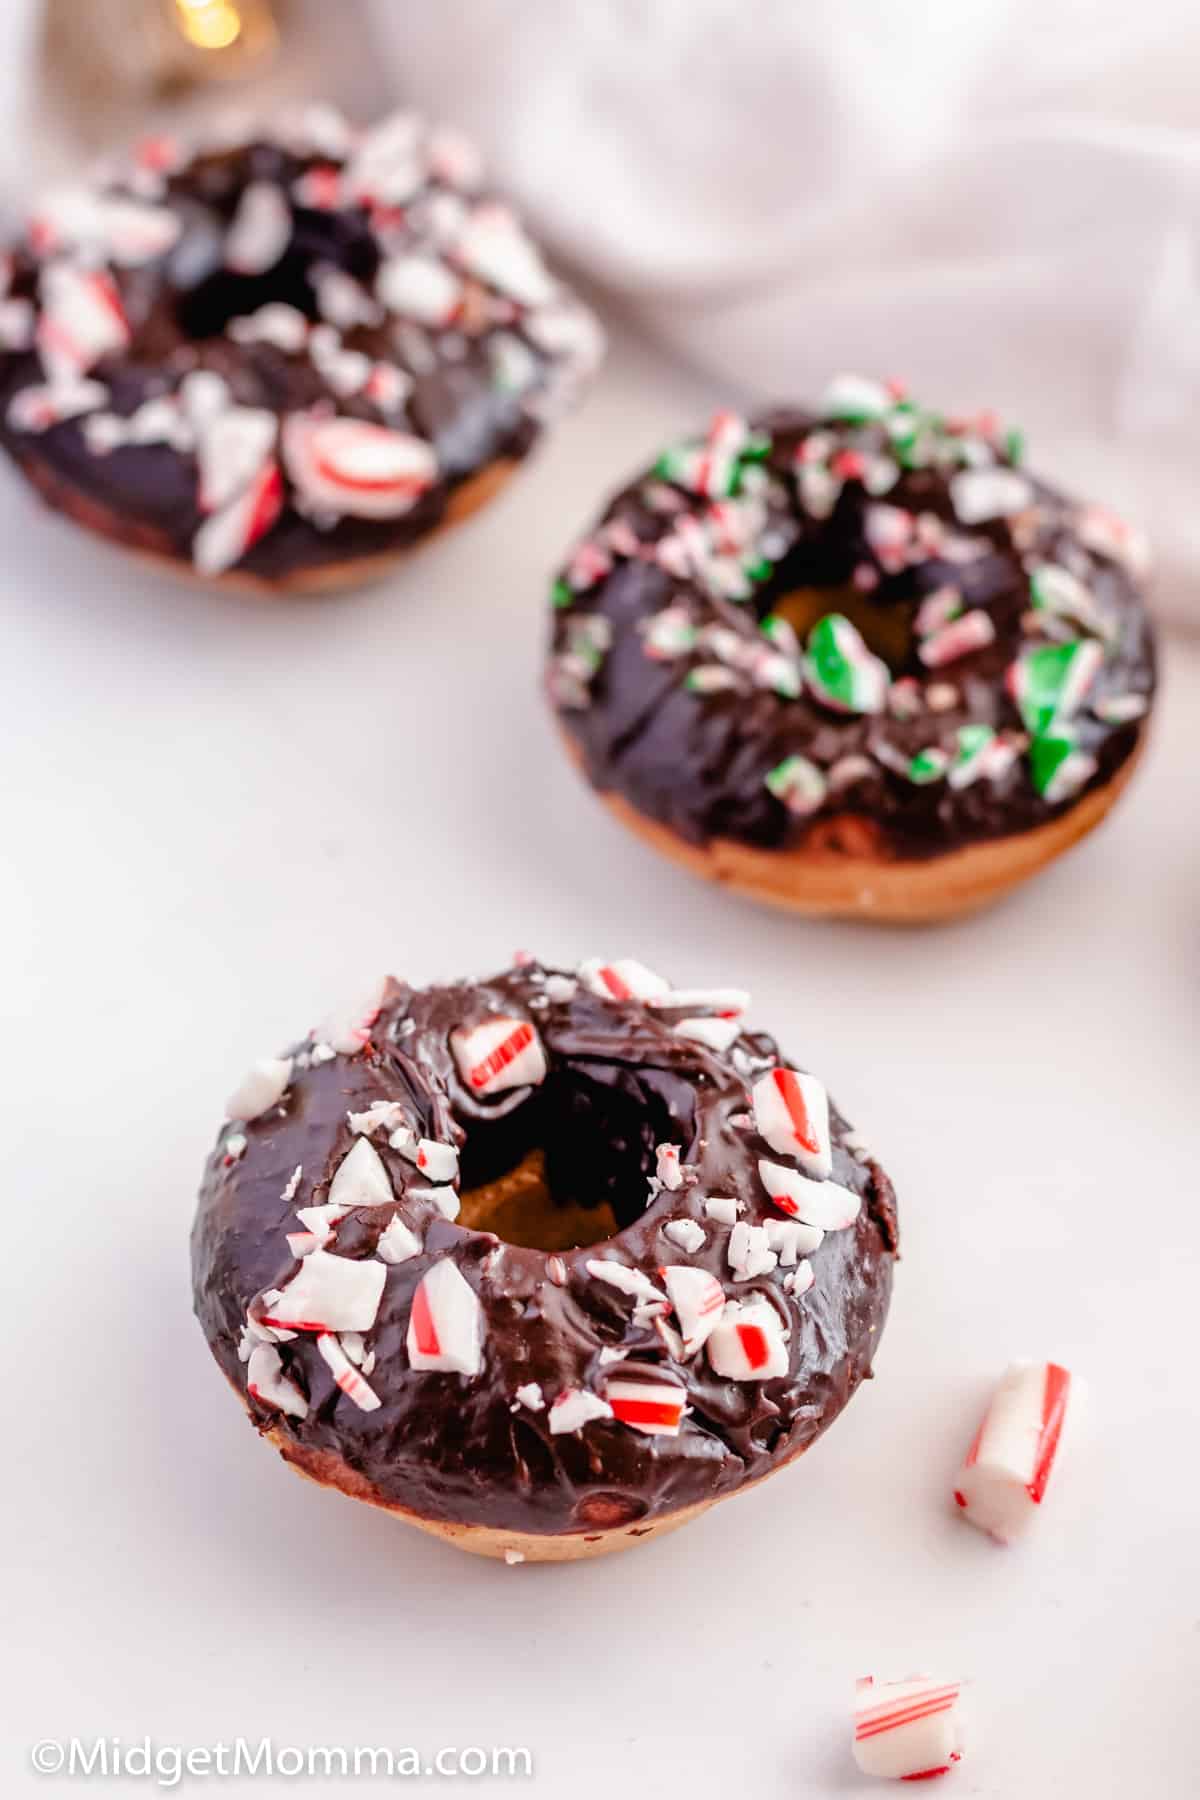  Chocolate Frosted Baked Cake Donuts